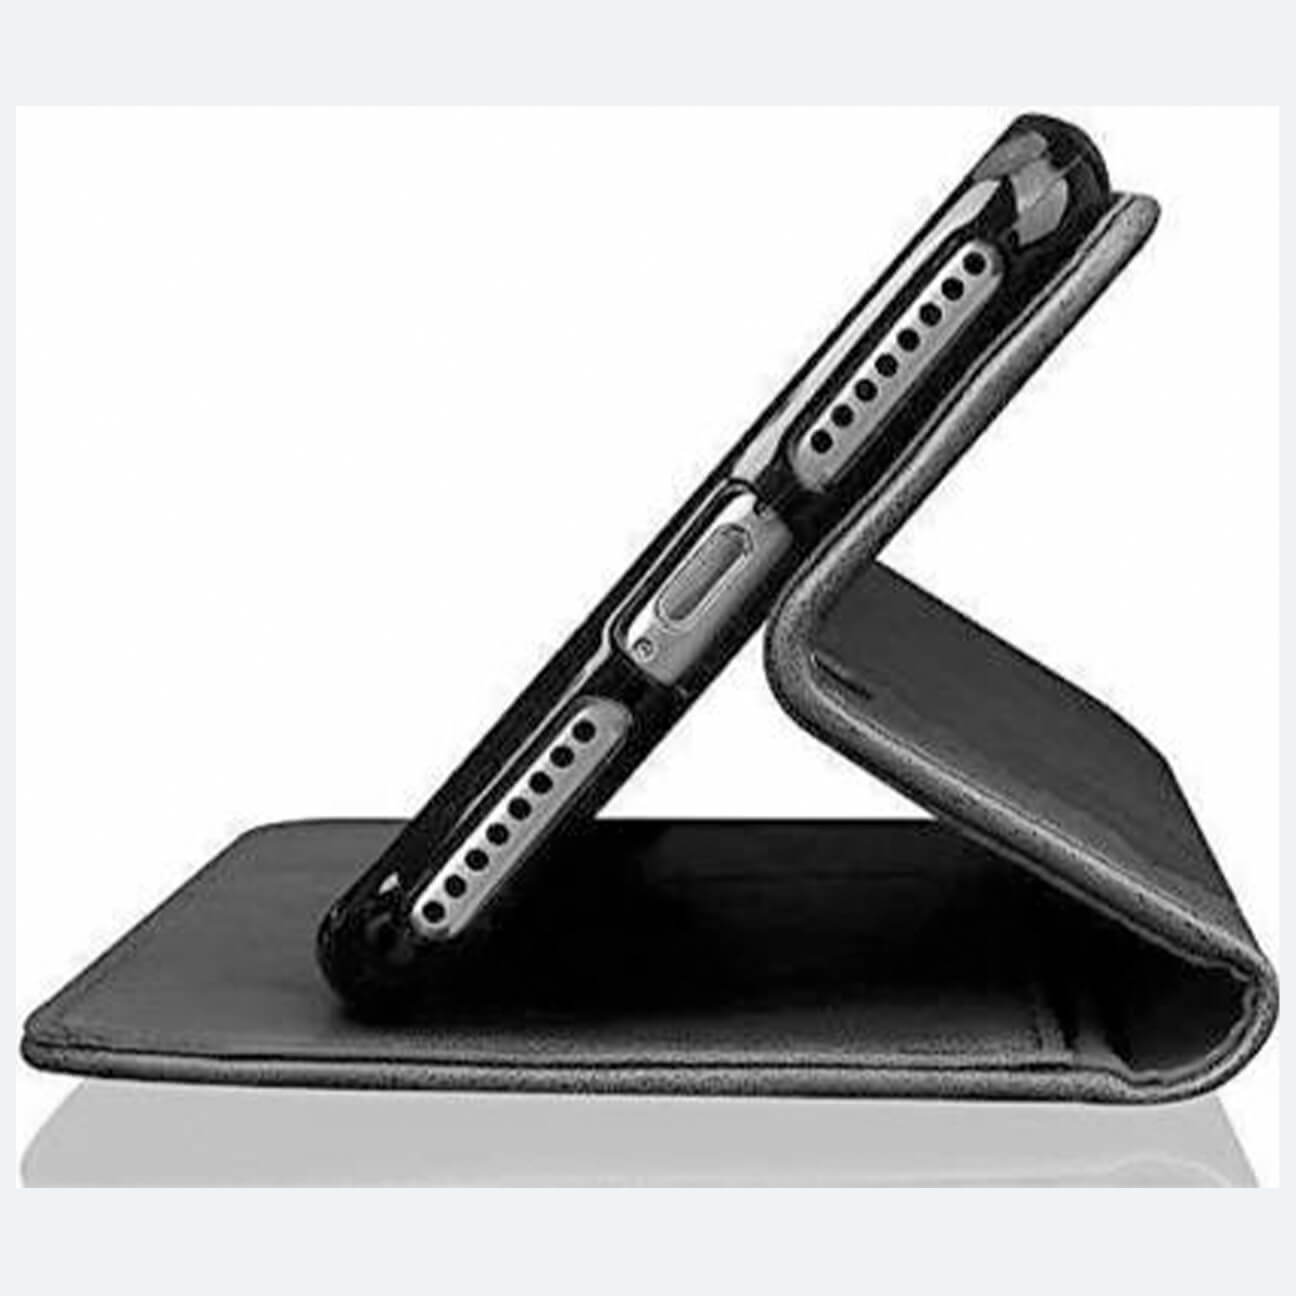 Samsung Galaxy Note 8 Flip Cover Image